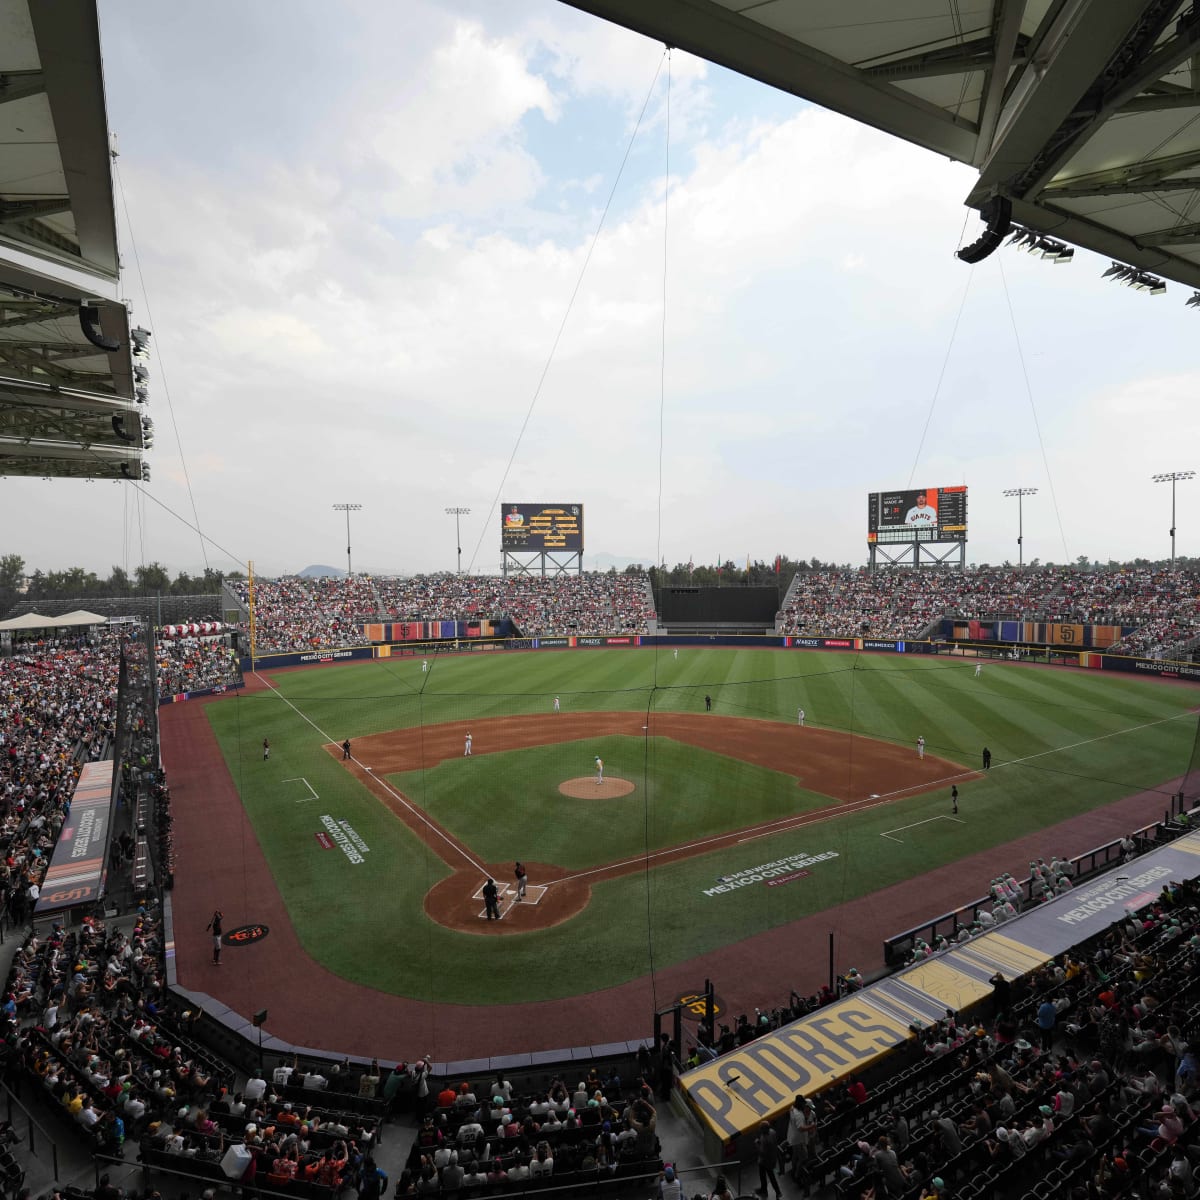 SF Giants lose to Padres 16-11 in HR-filled game in Mexico City